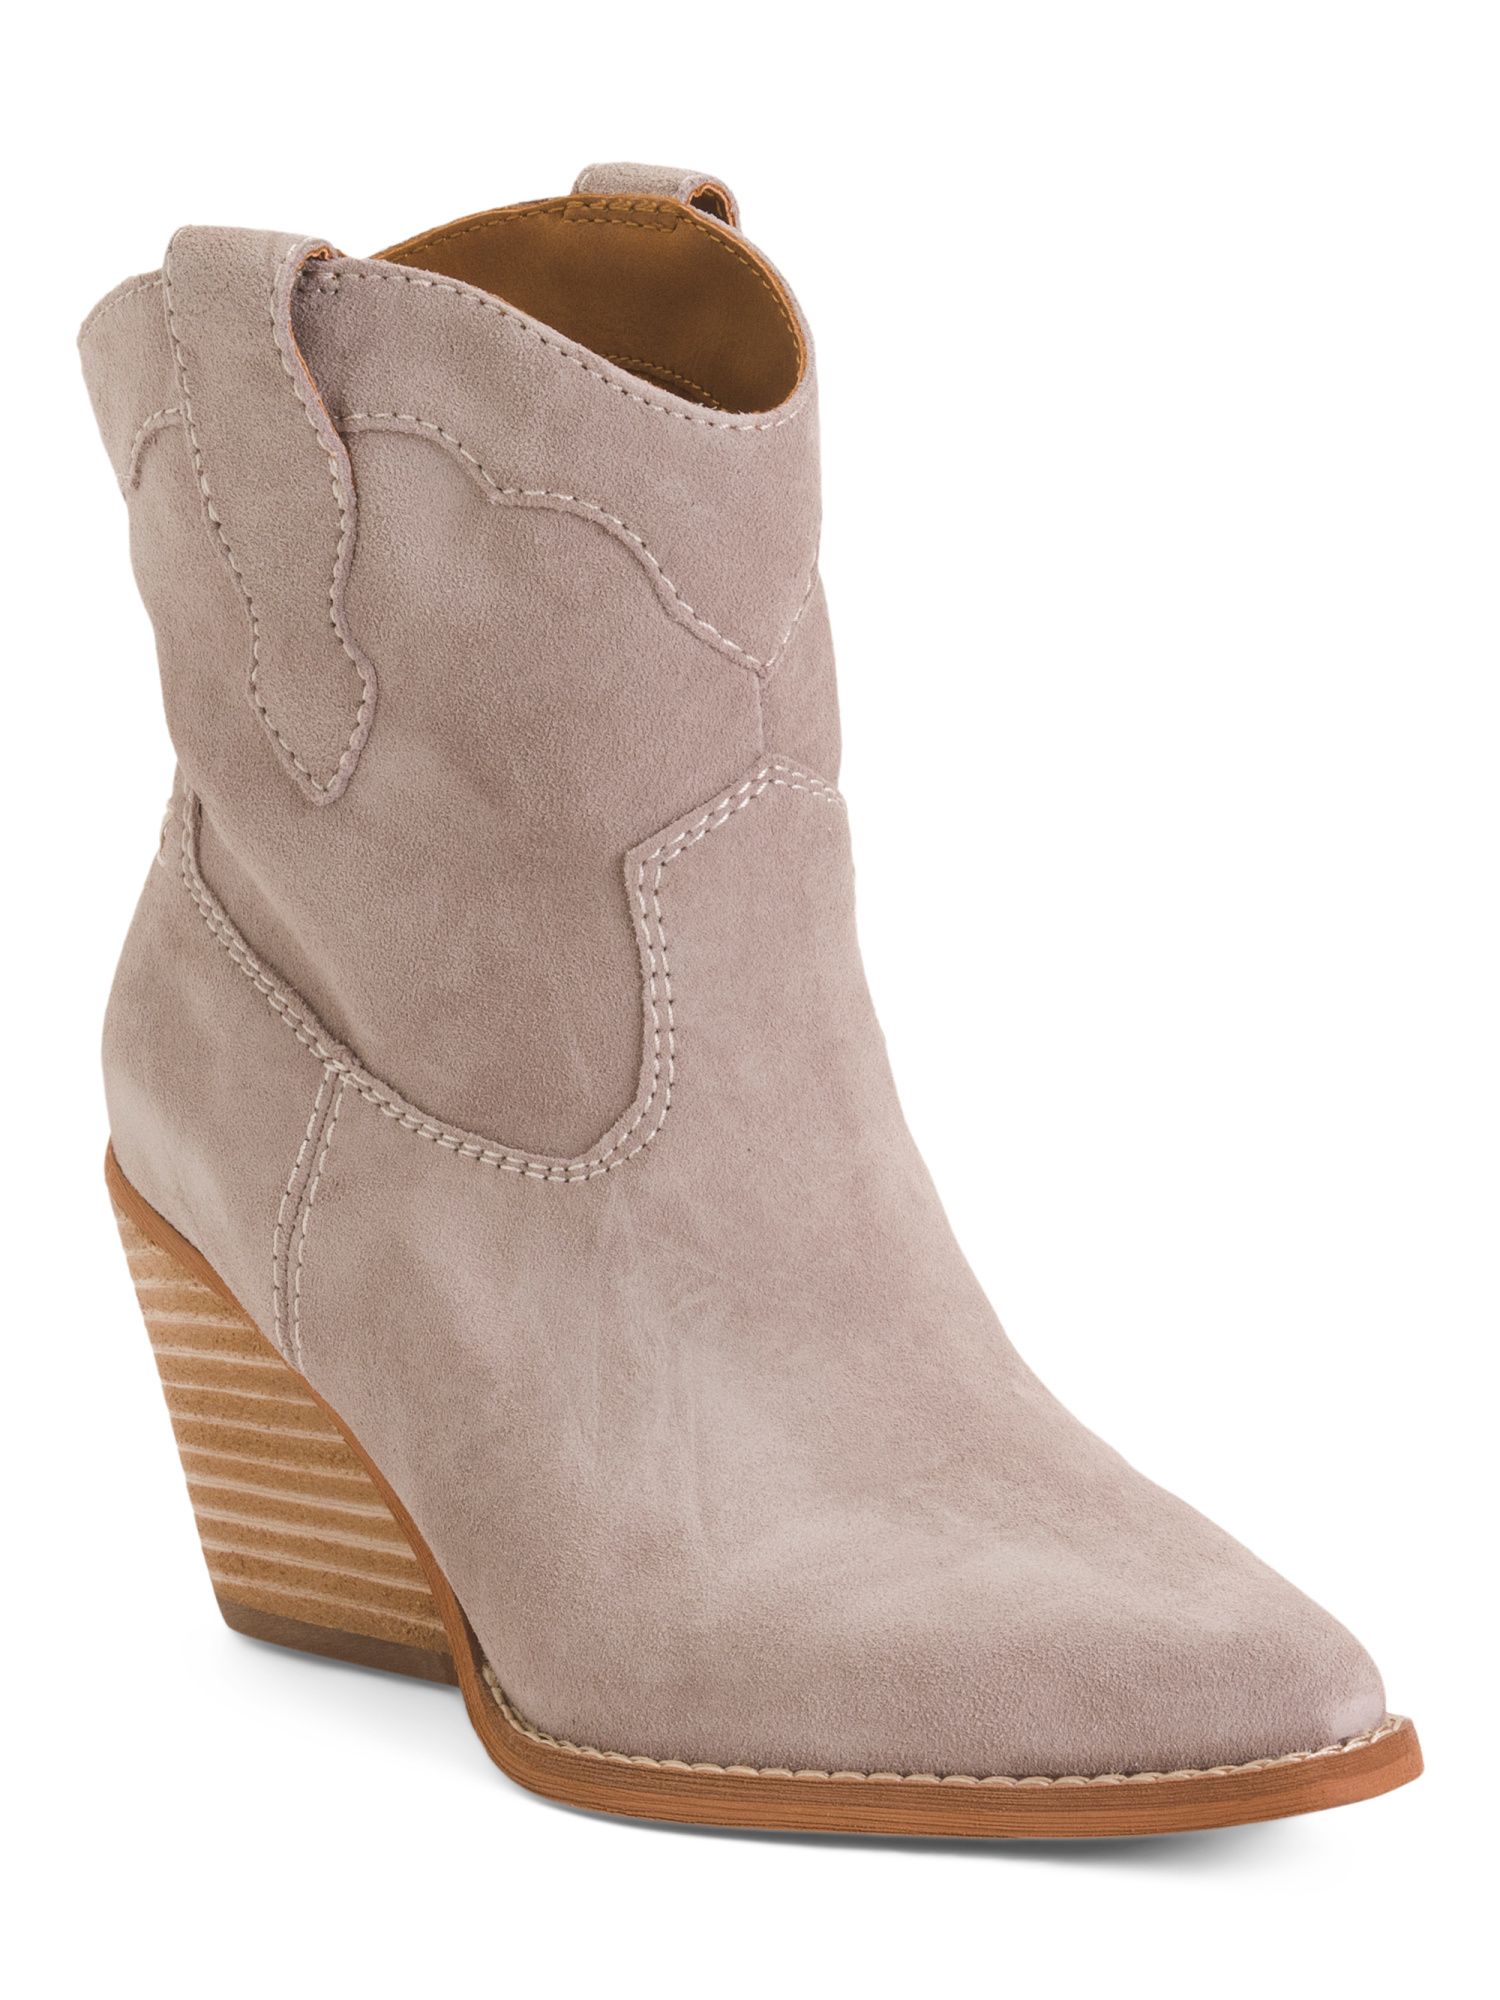 Oiled Suede Western Boots | Women's Shoes | Marshalls | Marshalls